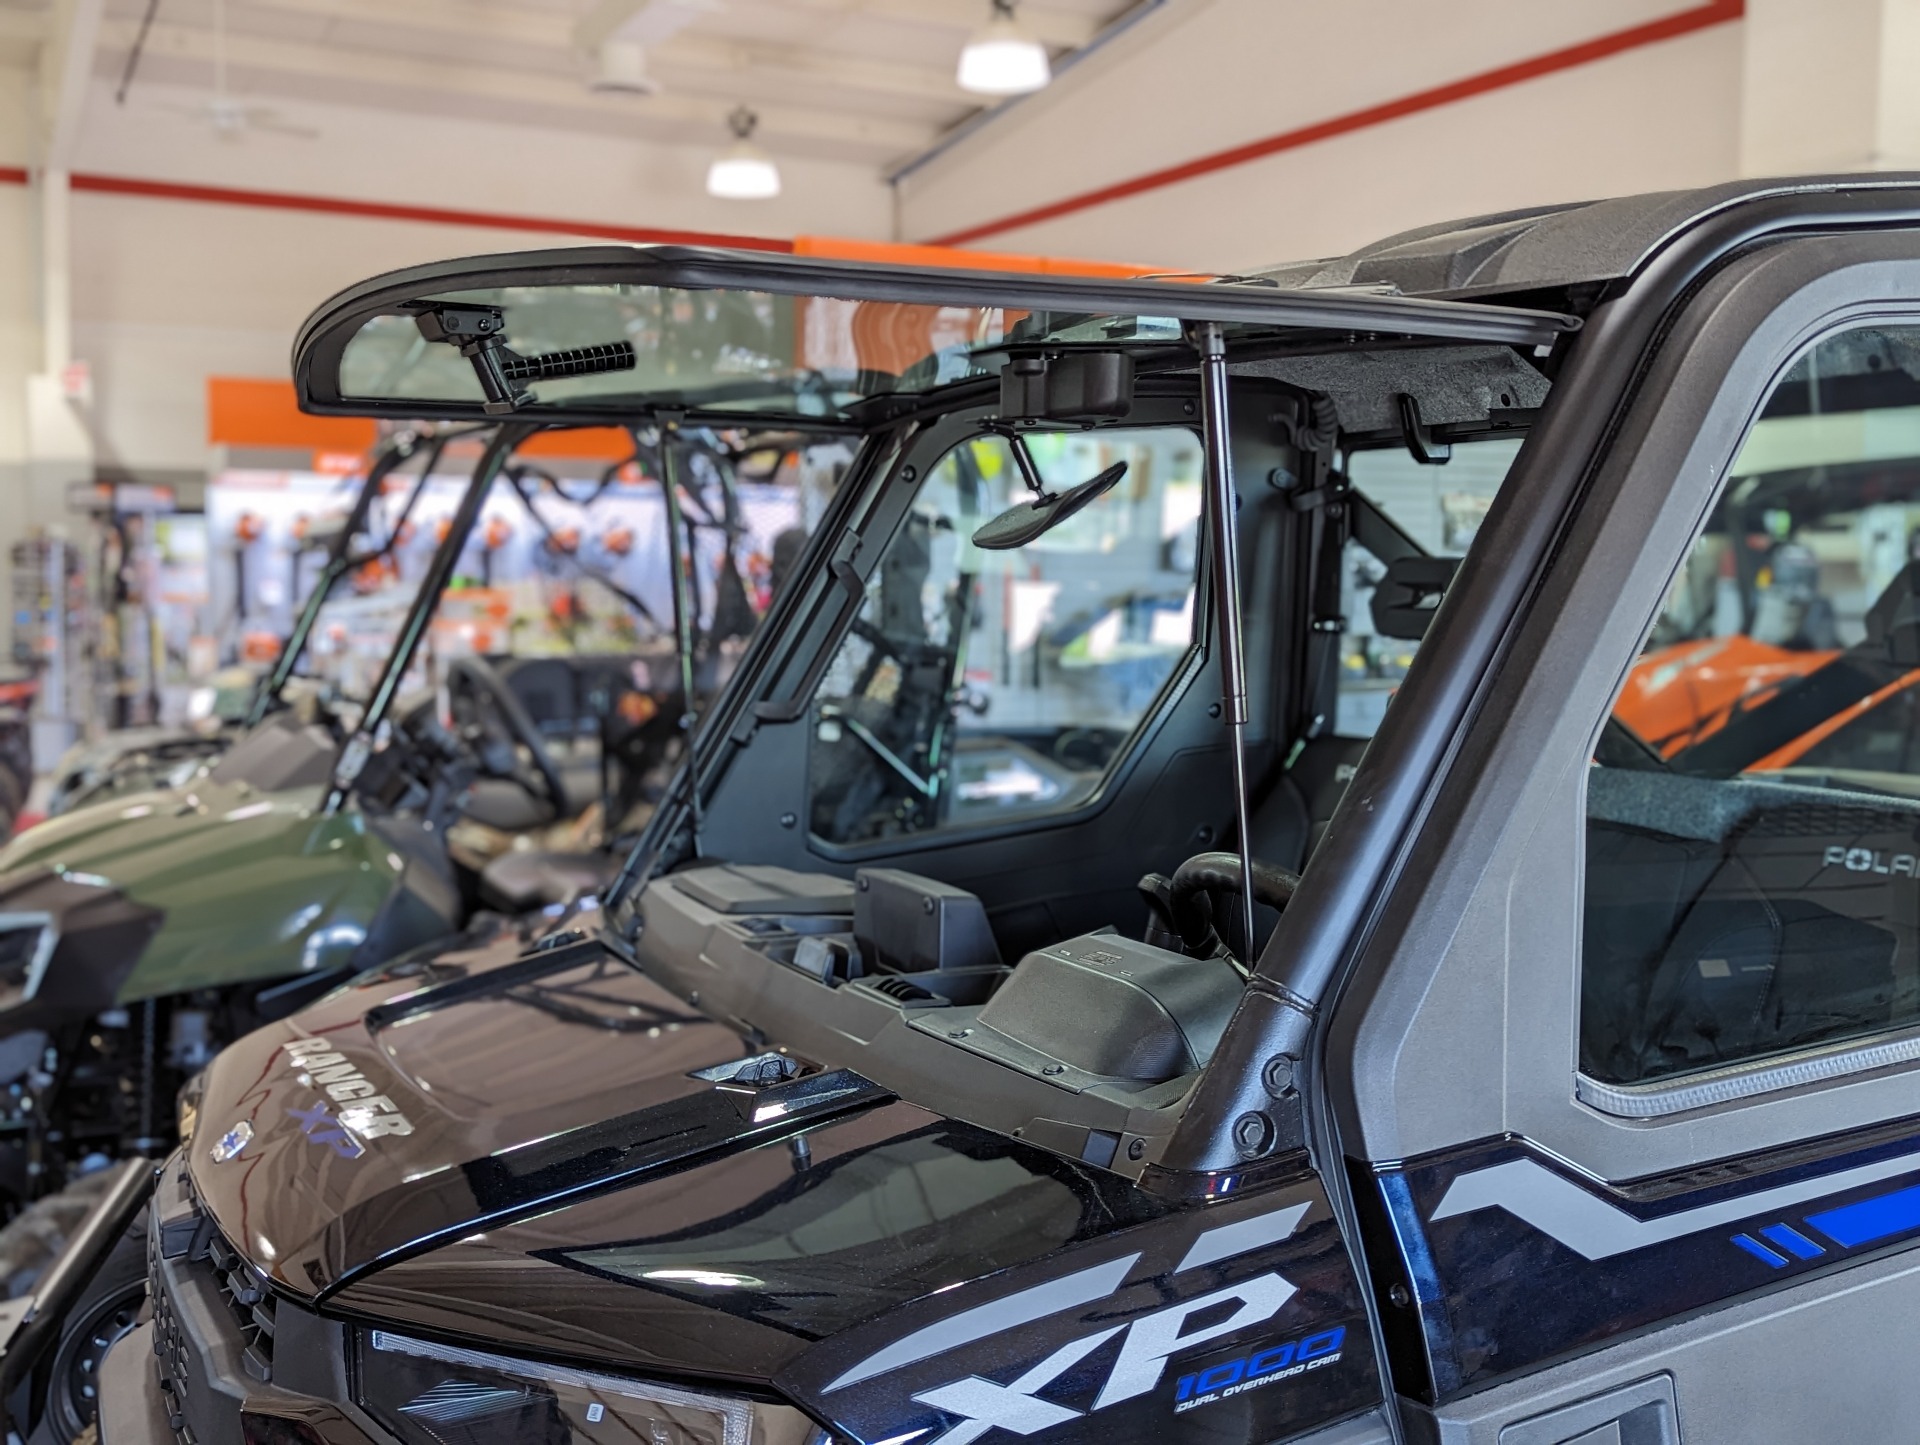 2023 Polaris Ranger XP 1000 Northstar Edition Ultimate - Ride Command Package in Winchester, Tennessee - Photo 3